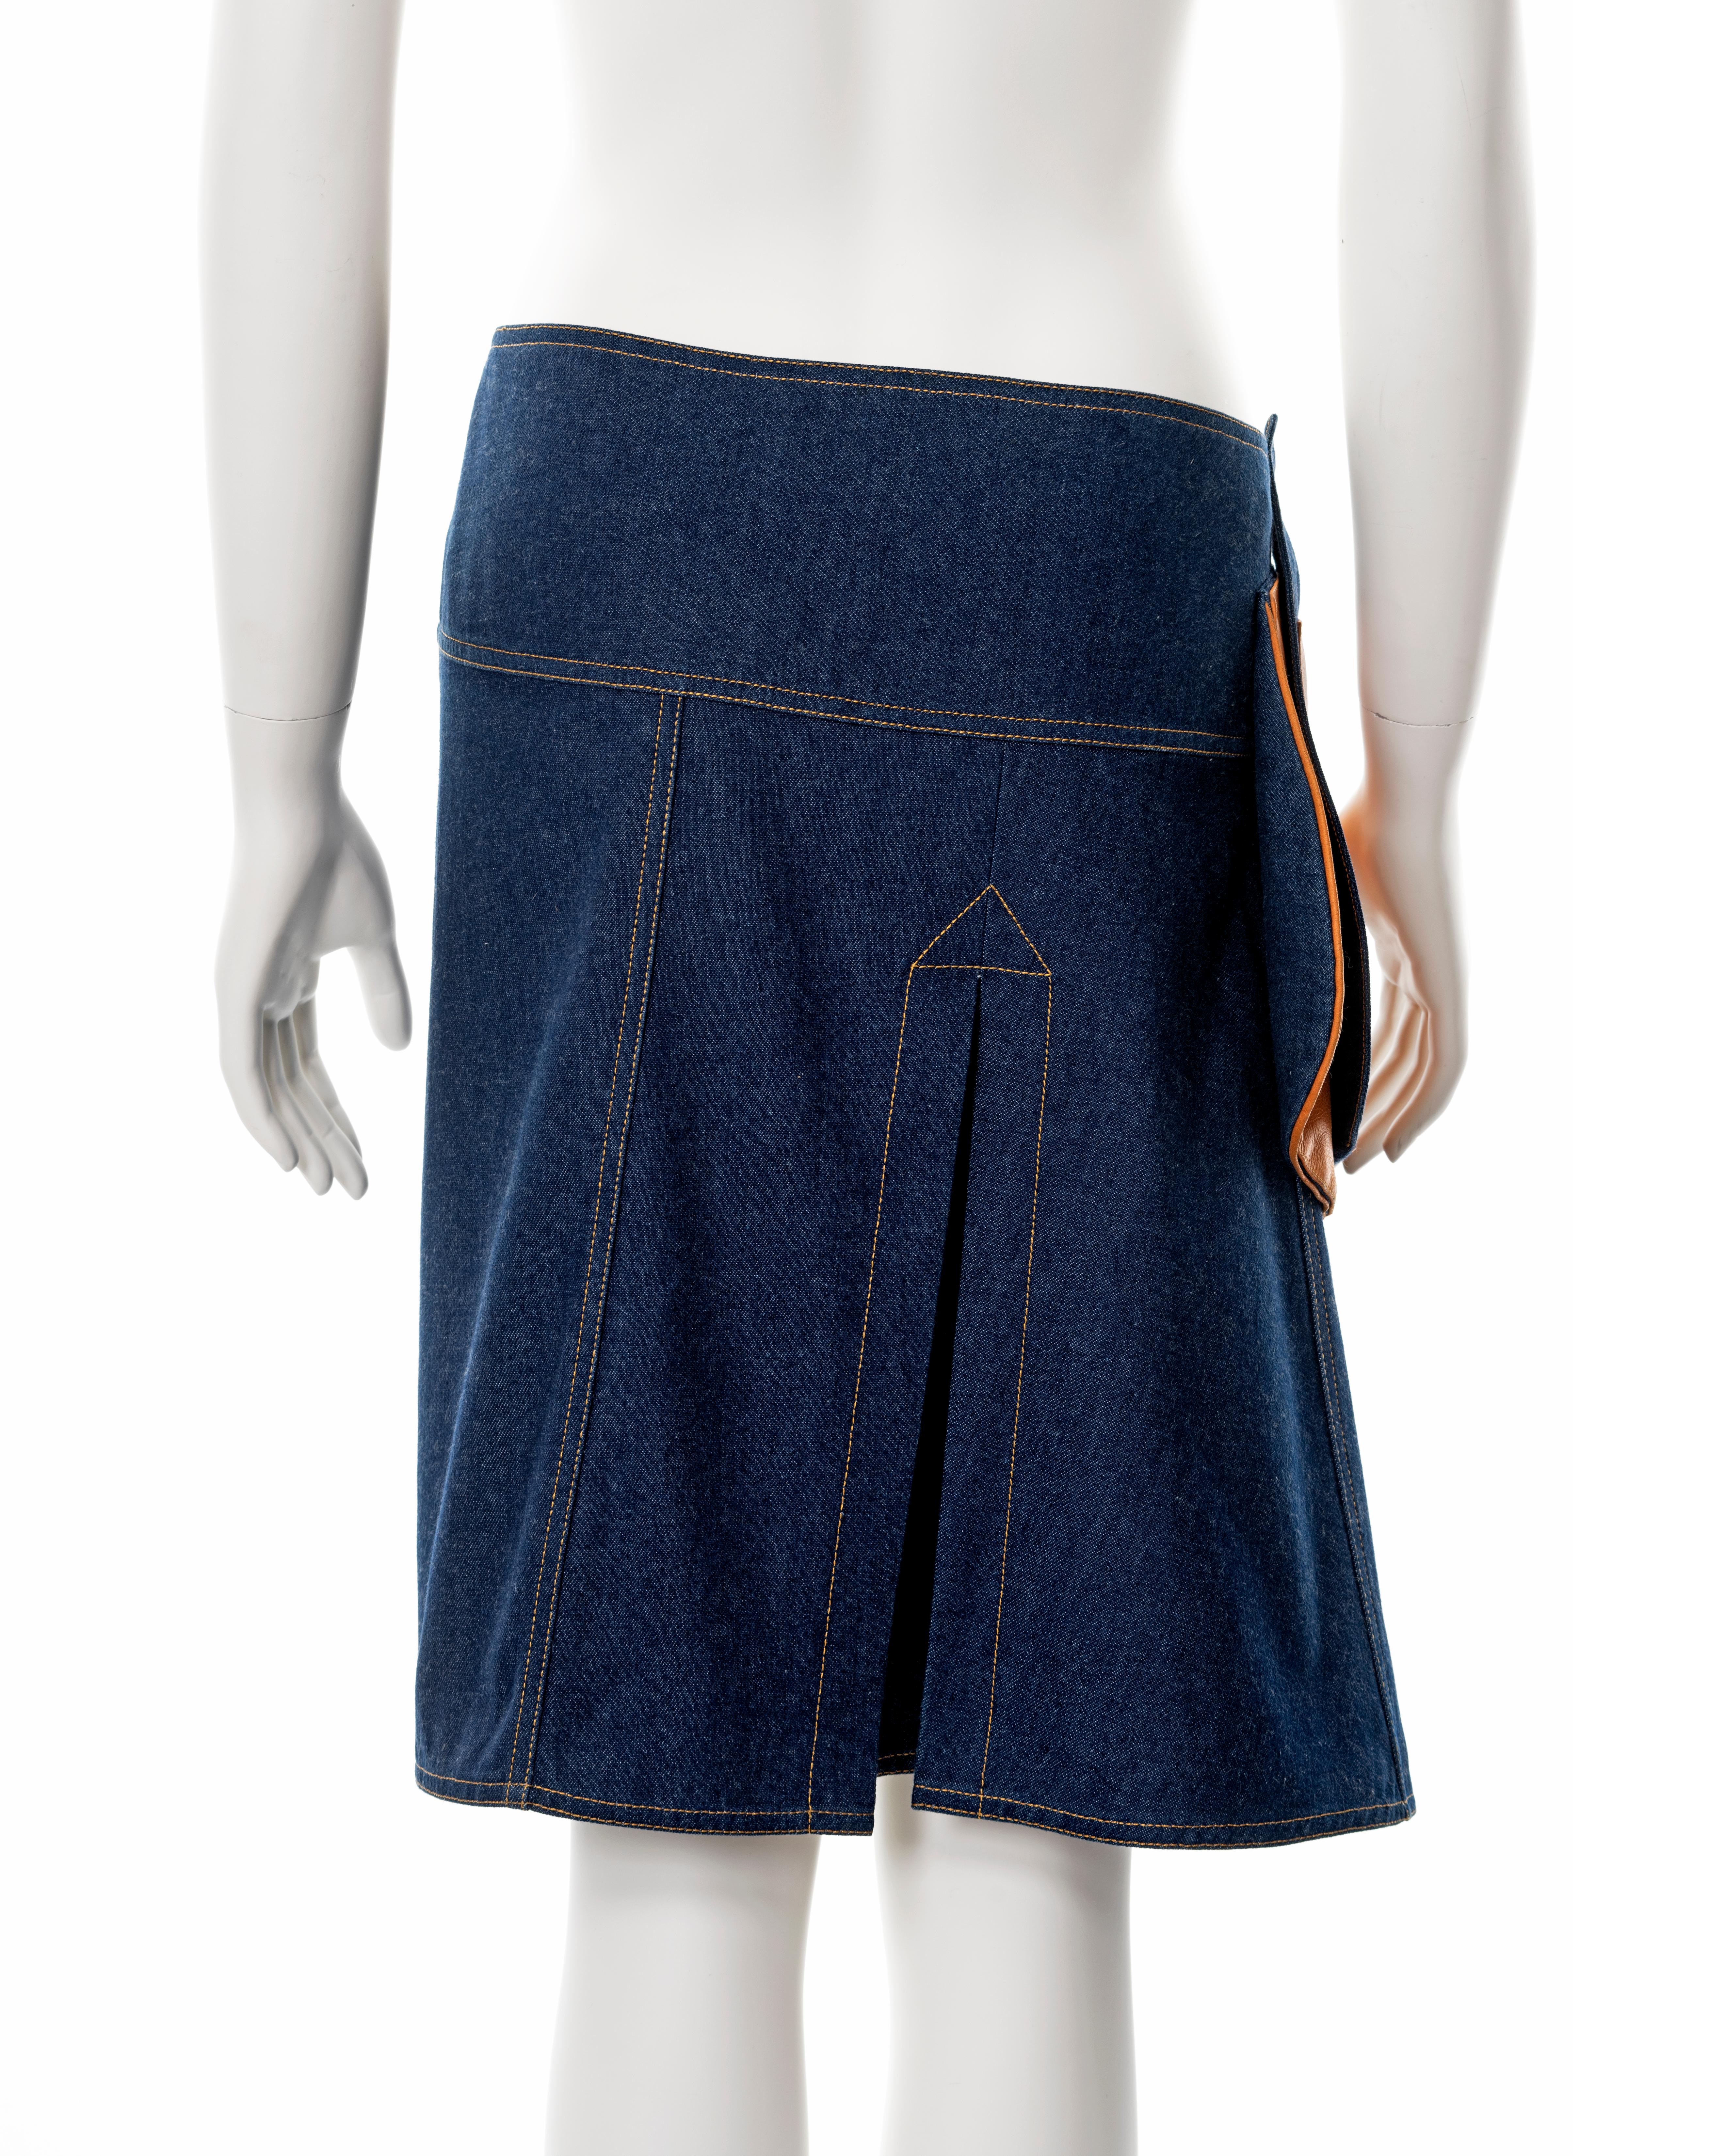 Christian Dior by John Galliano indigo denim and leather saddle skirt, ss 2000 For Sale 5